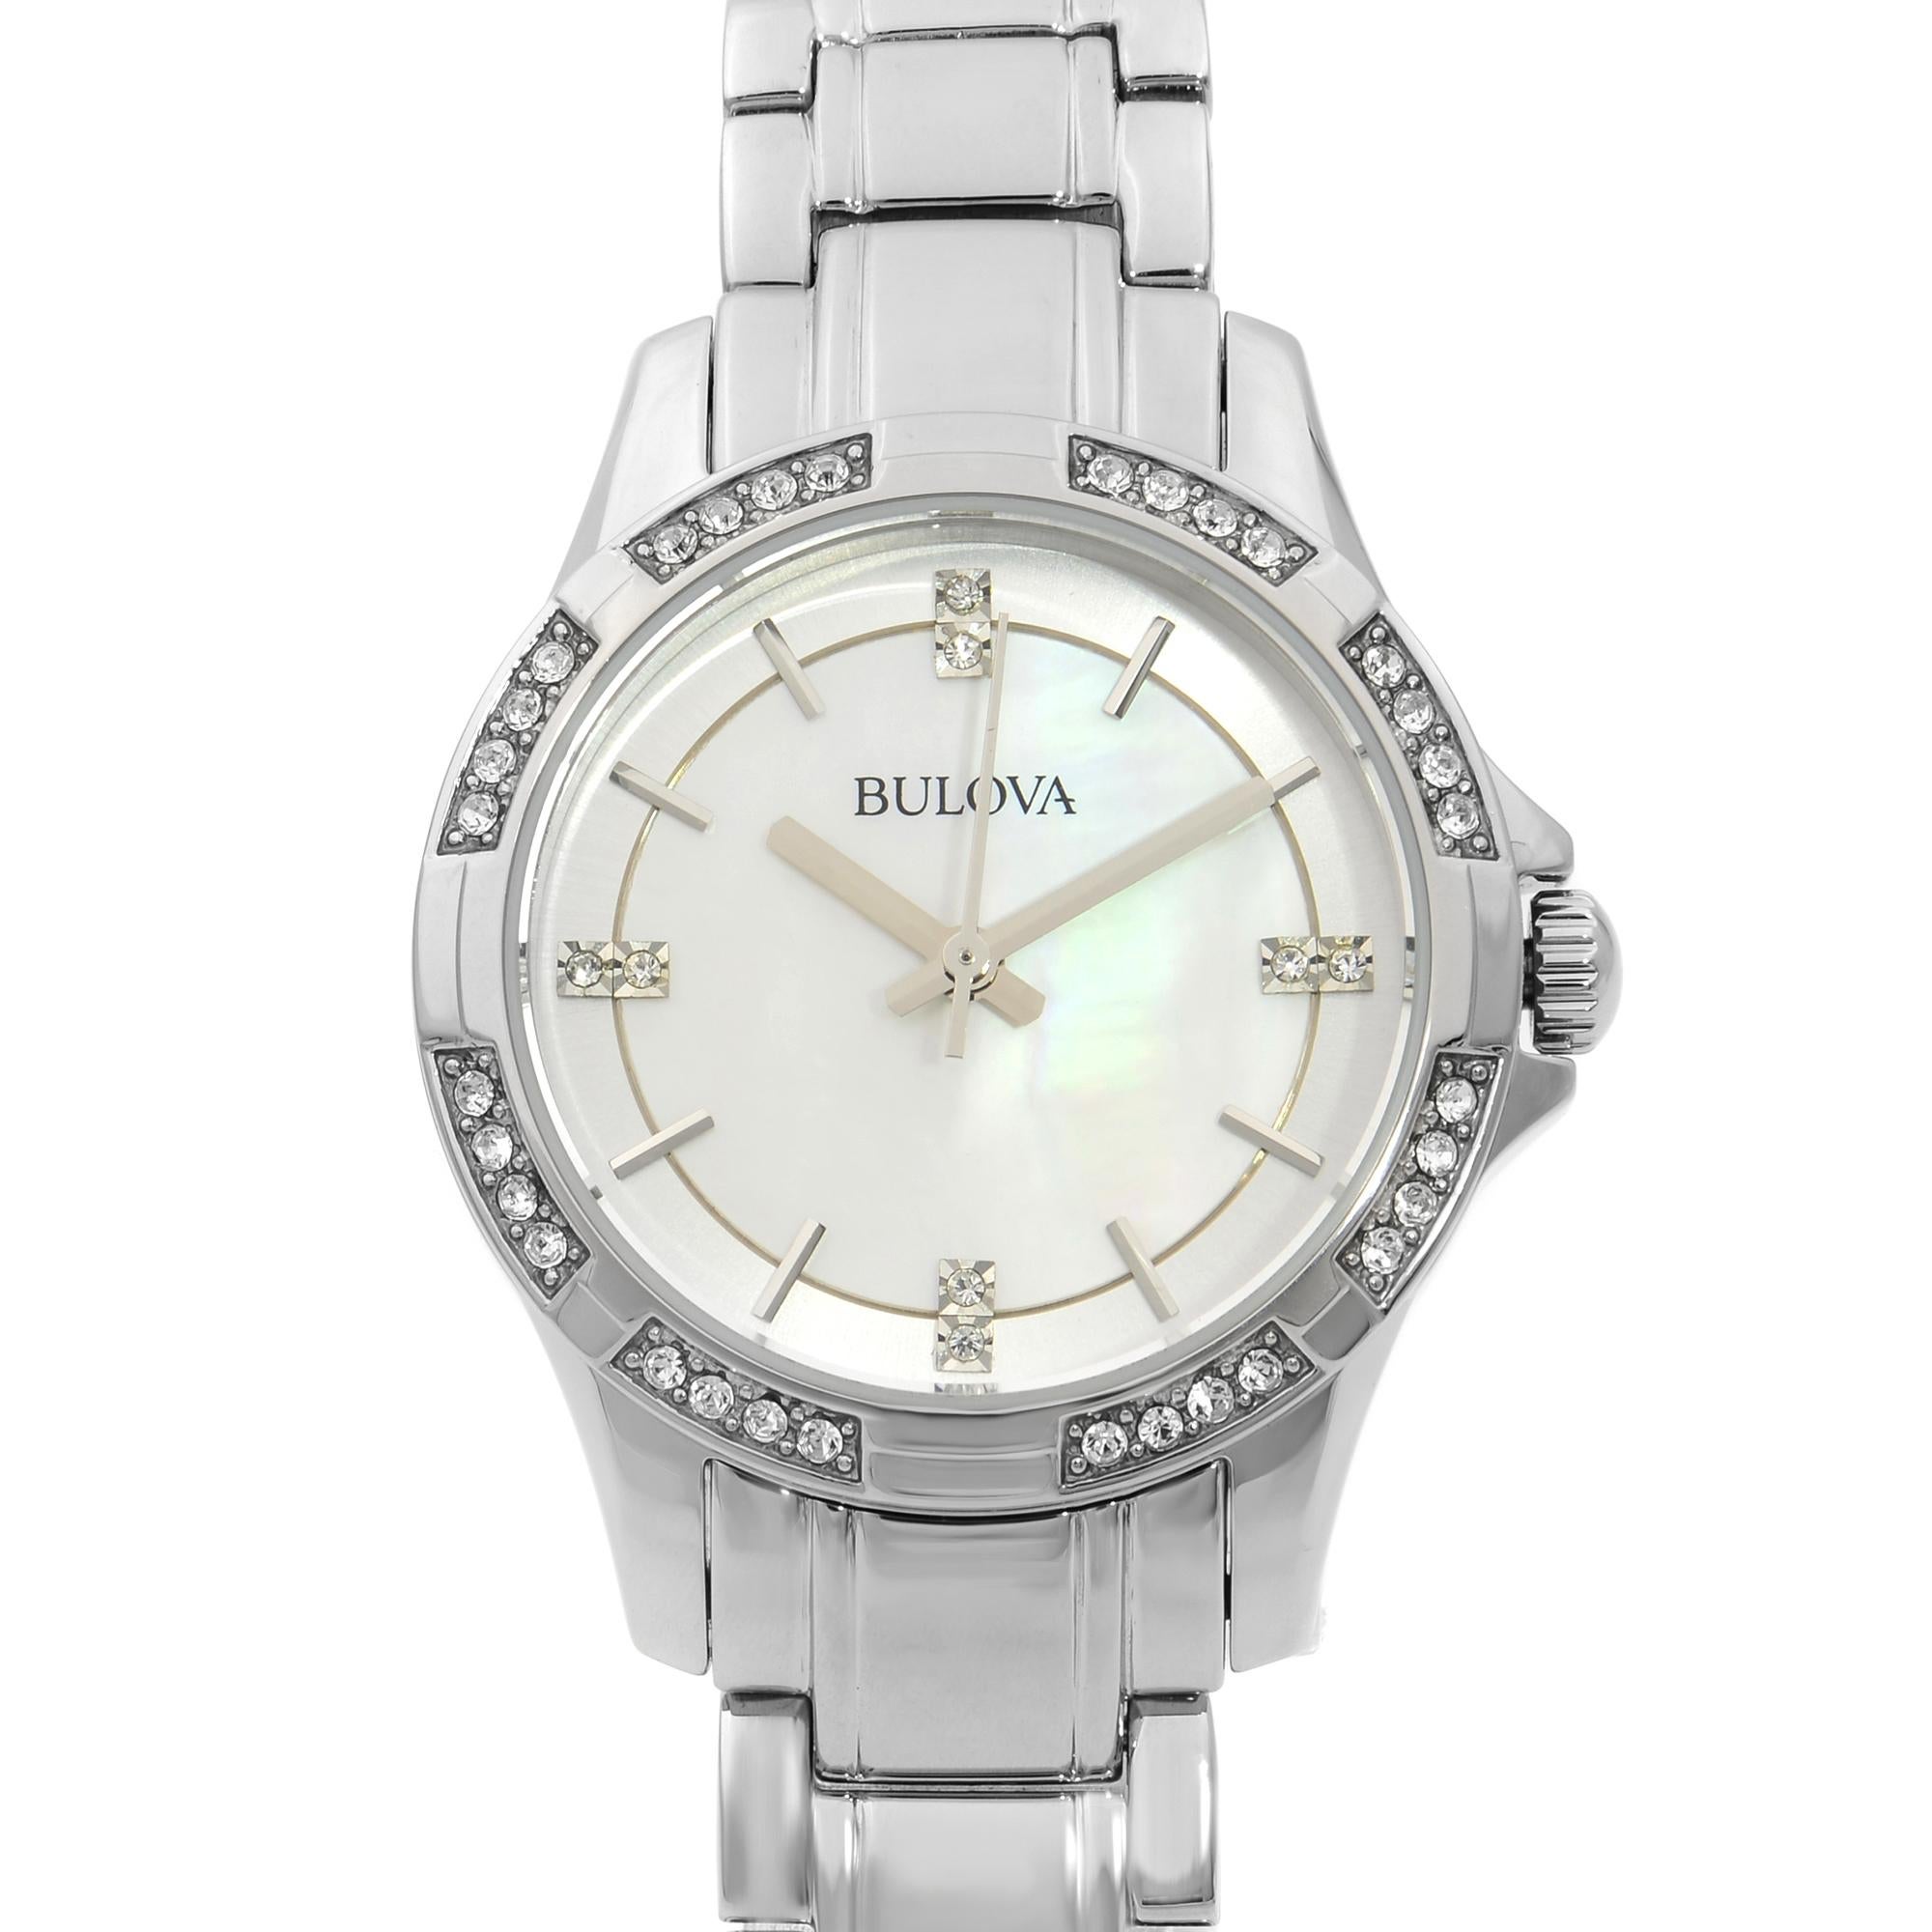 Bulova Crystals Accents Stainless Steel MOP Dial Quartz Ladies Watch 96L191 This Beautiful Timepiece is Powered by a Quartz (Battery) Movement and Features: a Stainless Steel Case and Bracelet, Fixed Stainless Steel Crystals Accents Bezel, a Silver